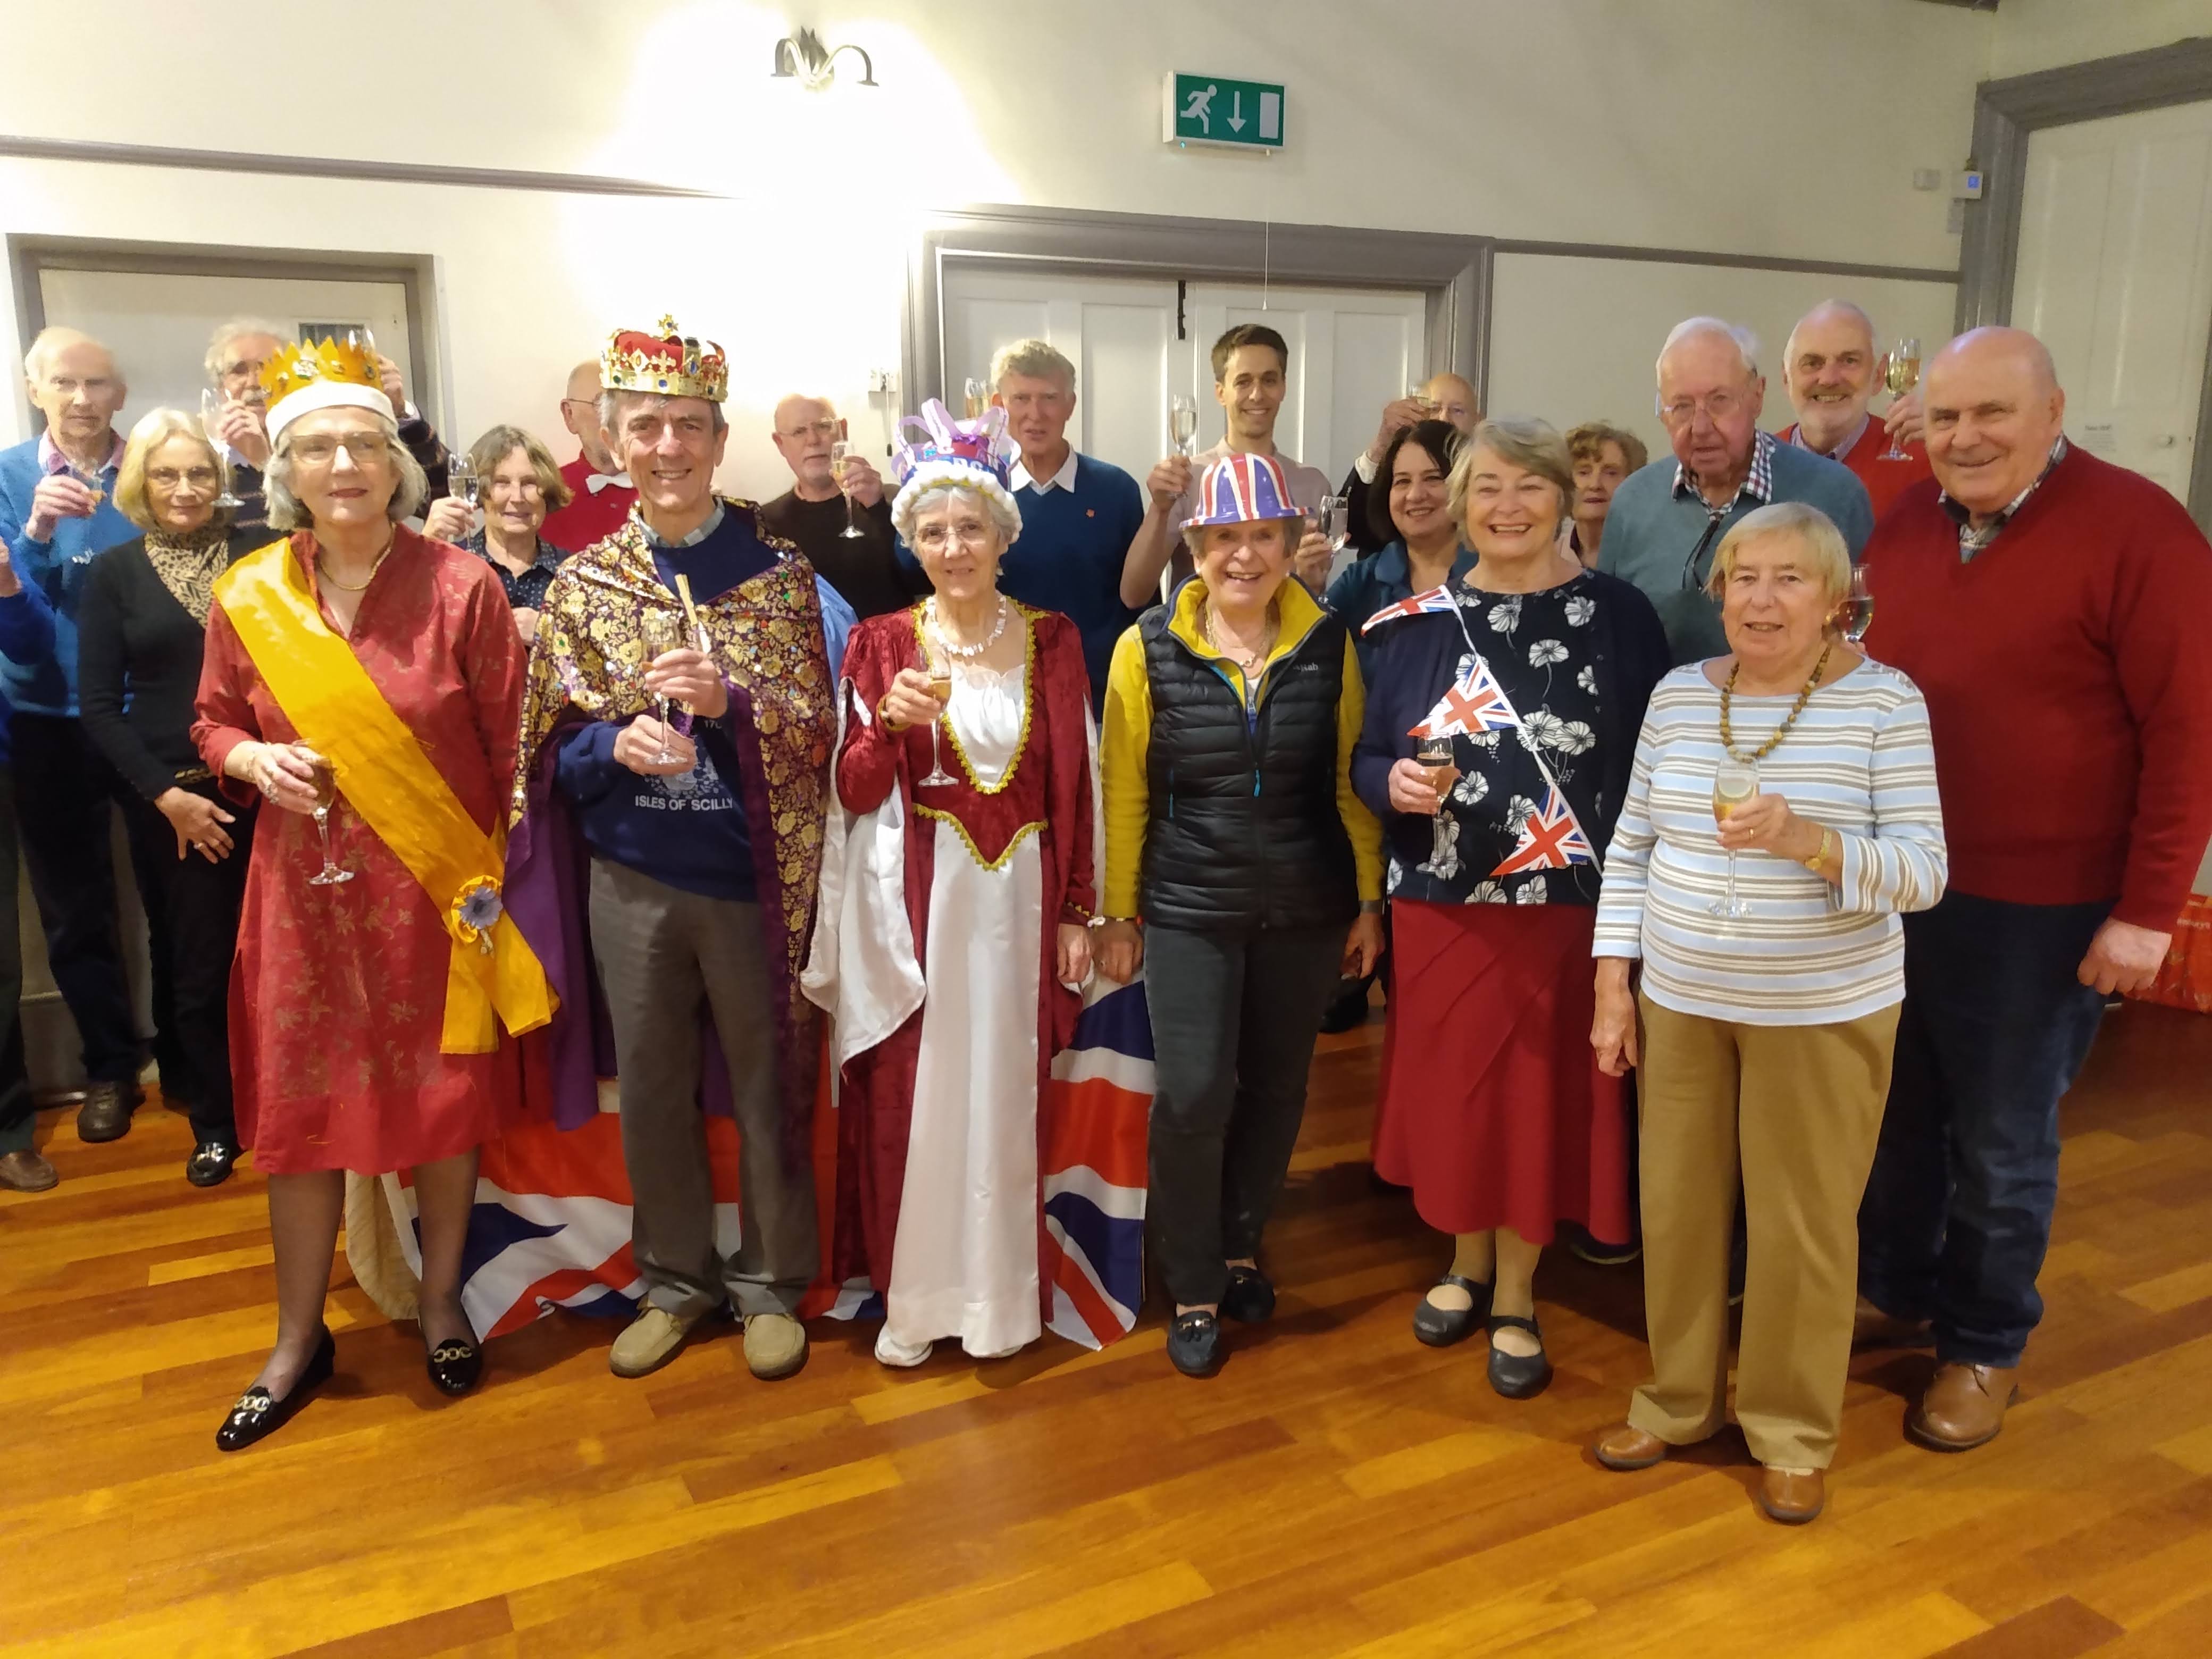 Goring & Streatley Bridge Club coronation party. Many of the members are dressed in fancy dress with hats and flags